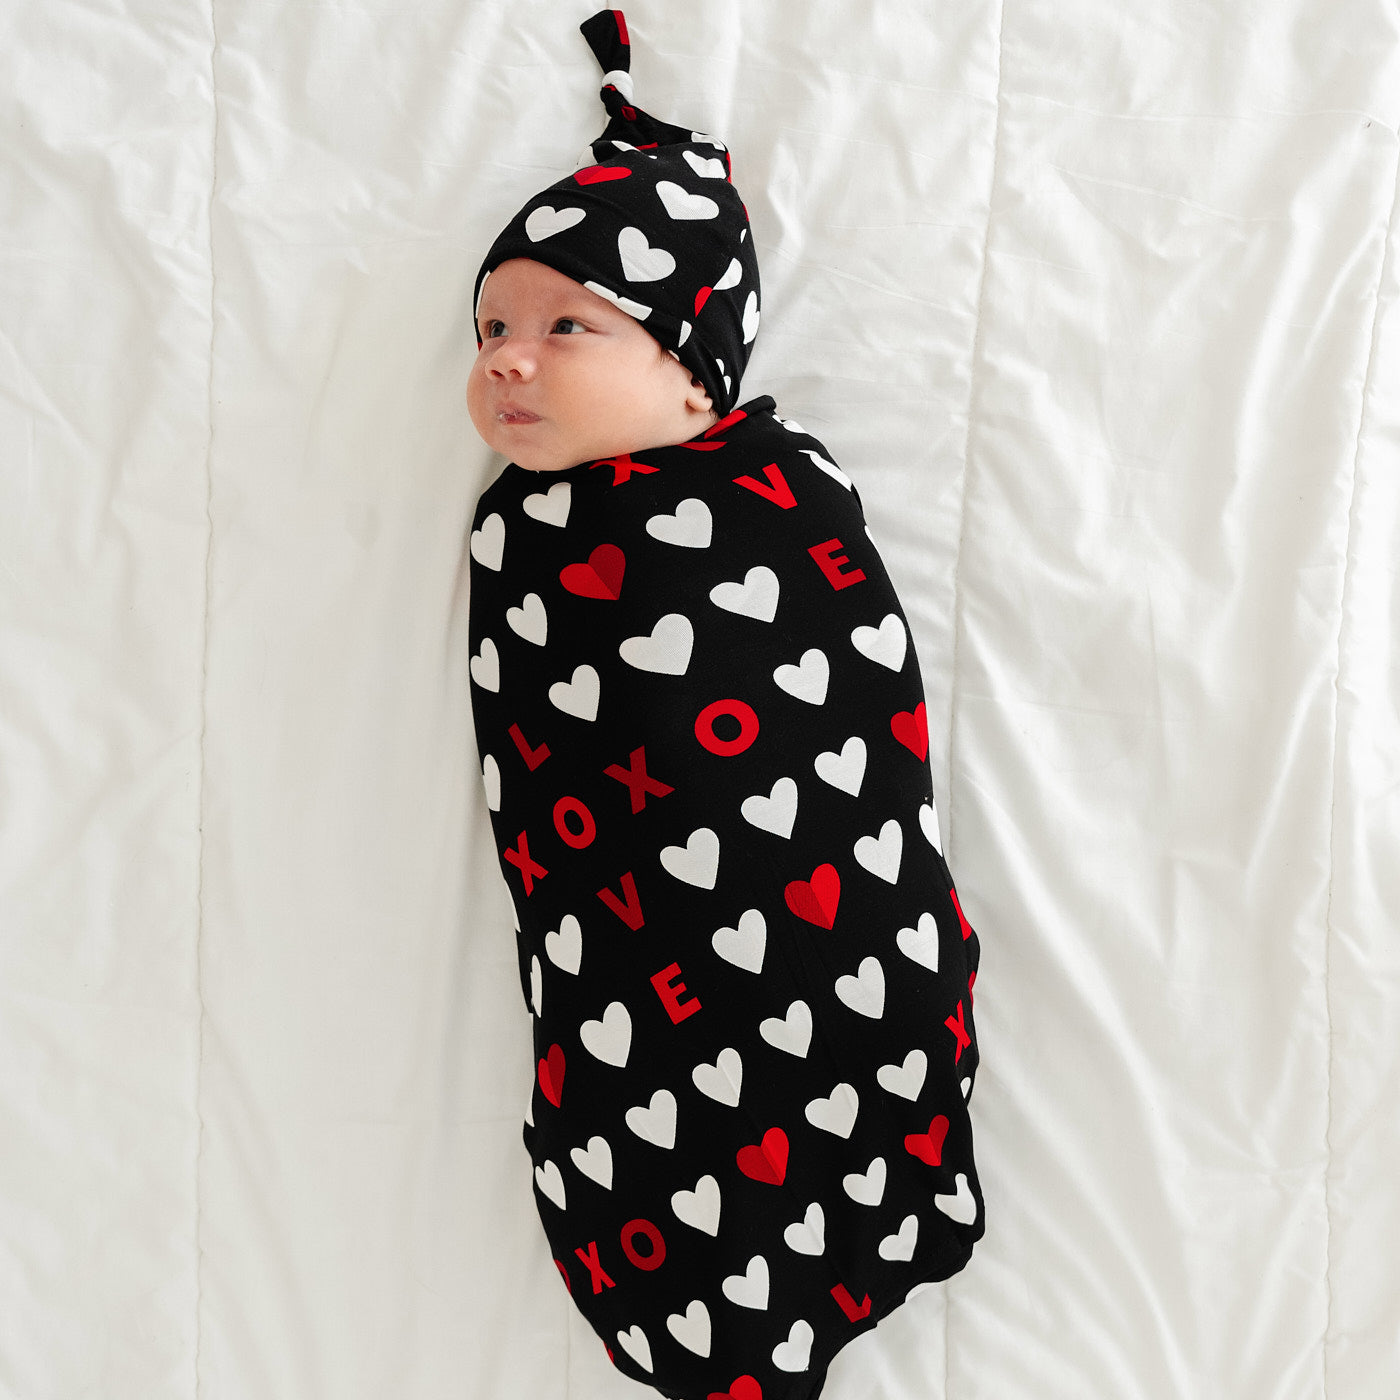 Child laying on a bed swaddled in a Black XOXO swaddle and hat set